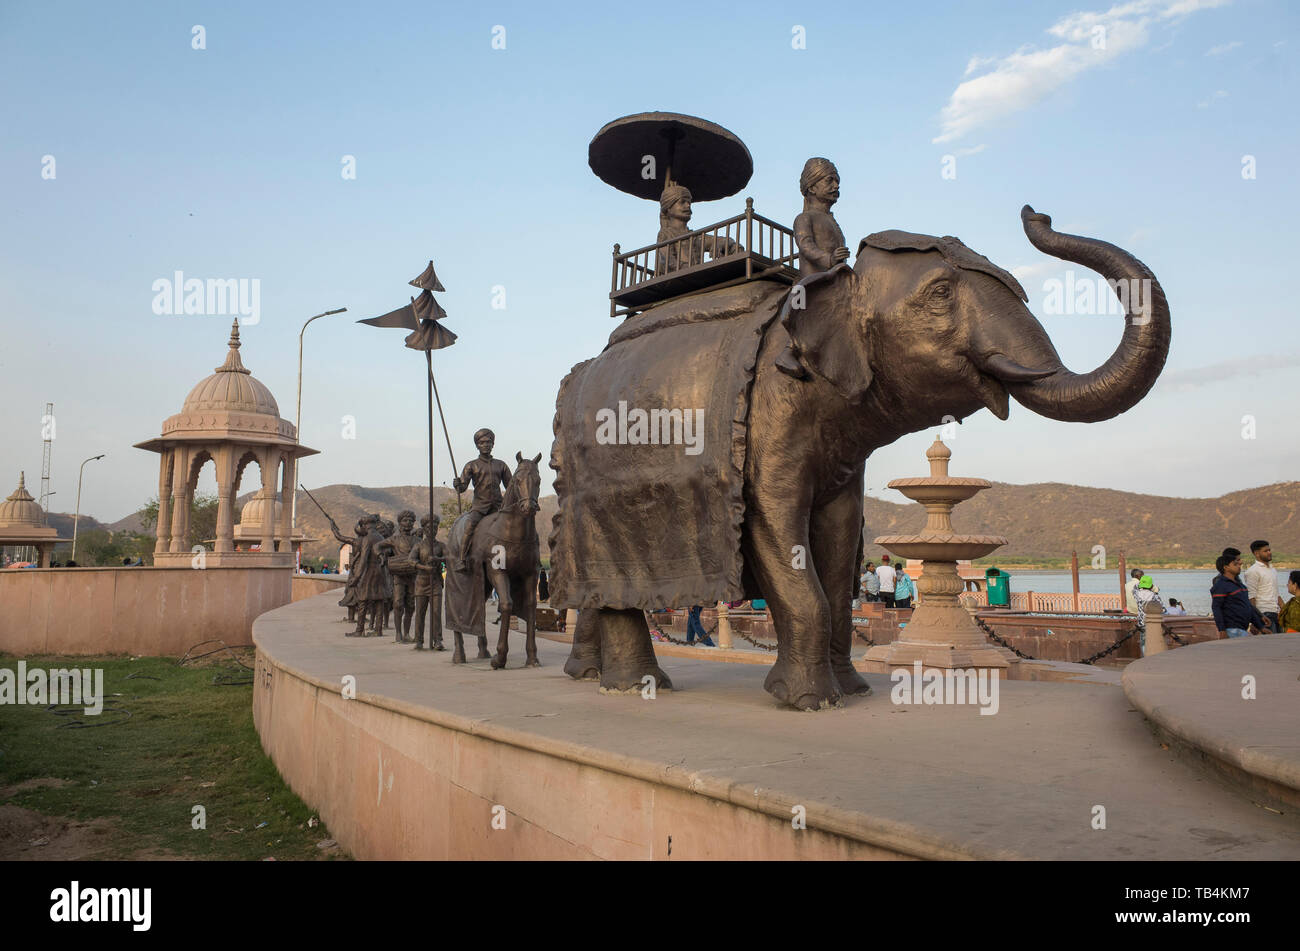 Jaipur, Rajasthan / India - 03 25 2019, Statues in the city Stock Photo